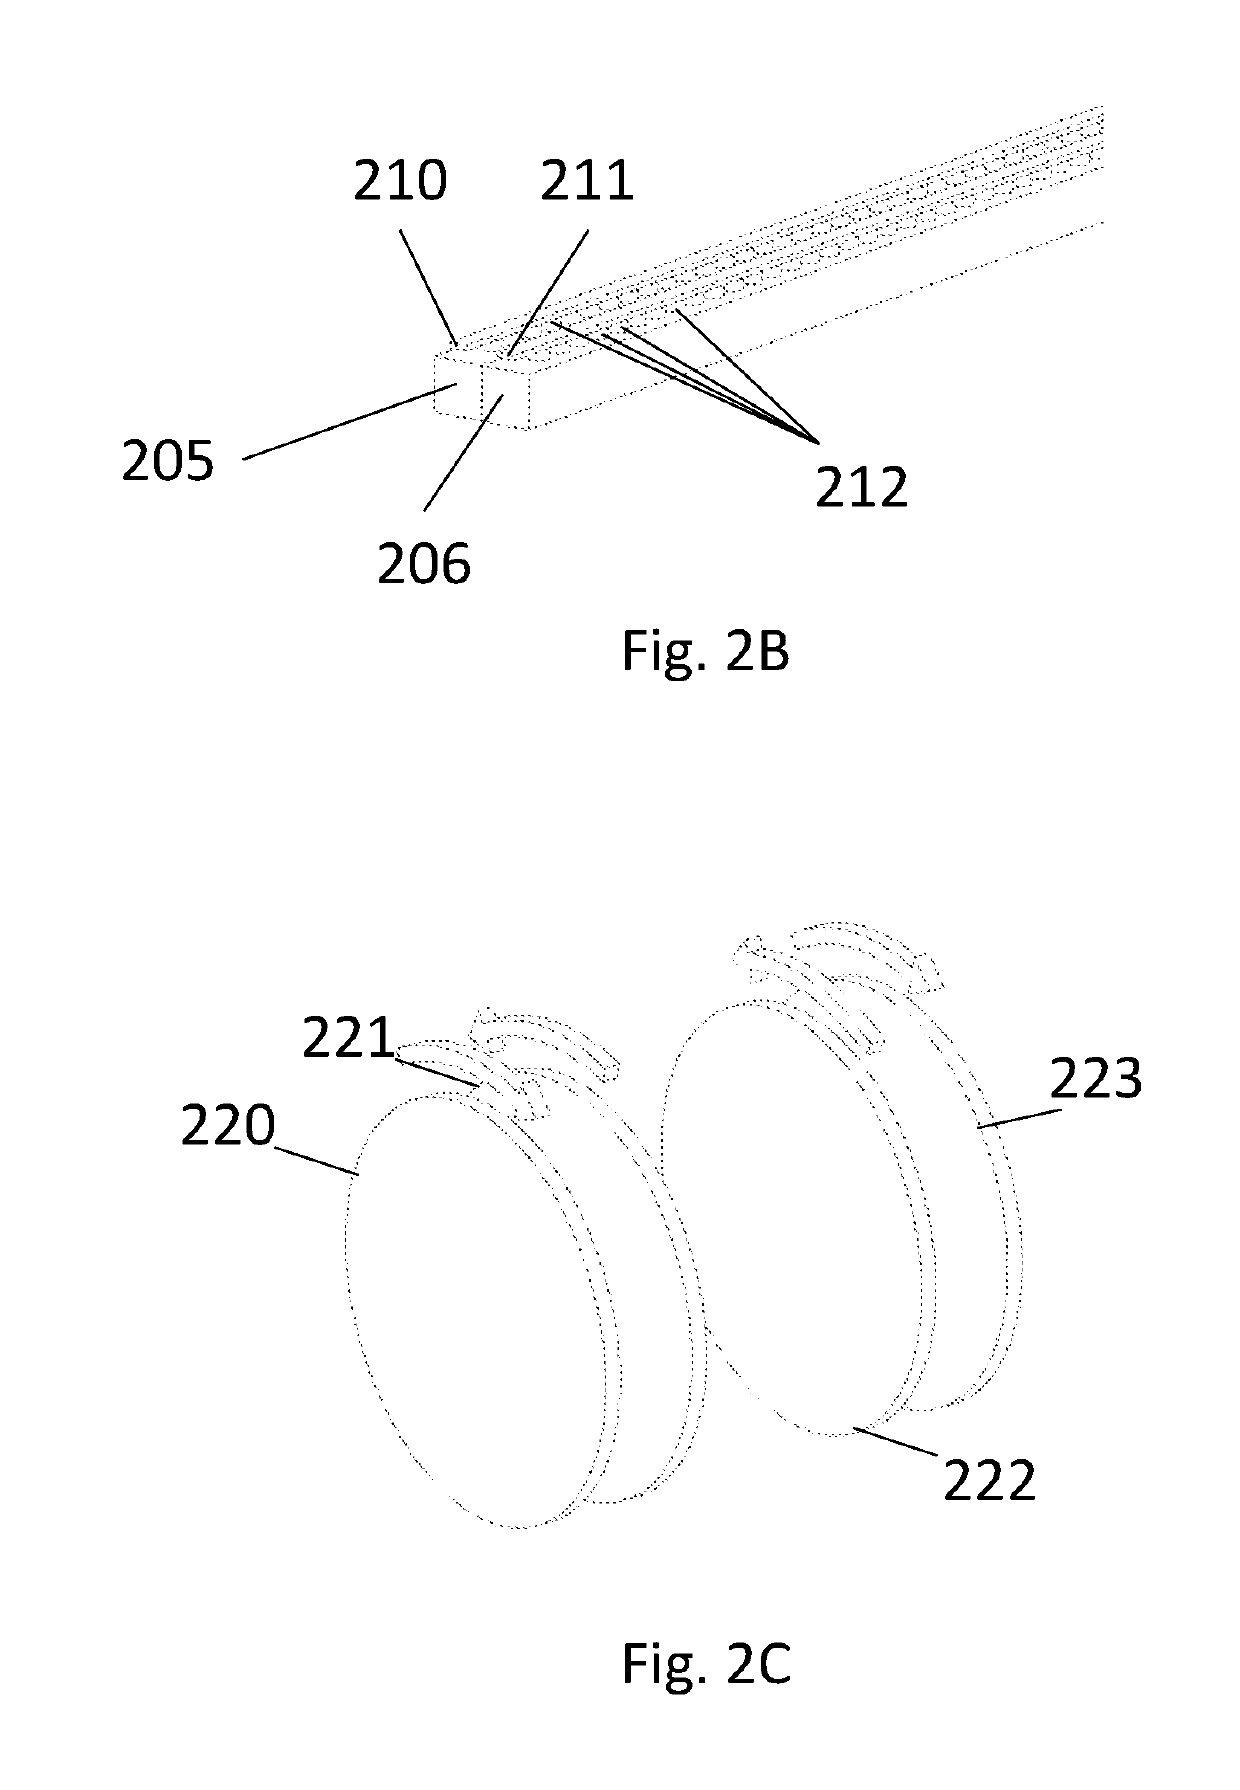 Hybrid scanning display and associated mechanisms